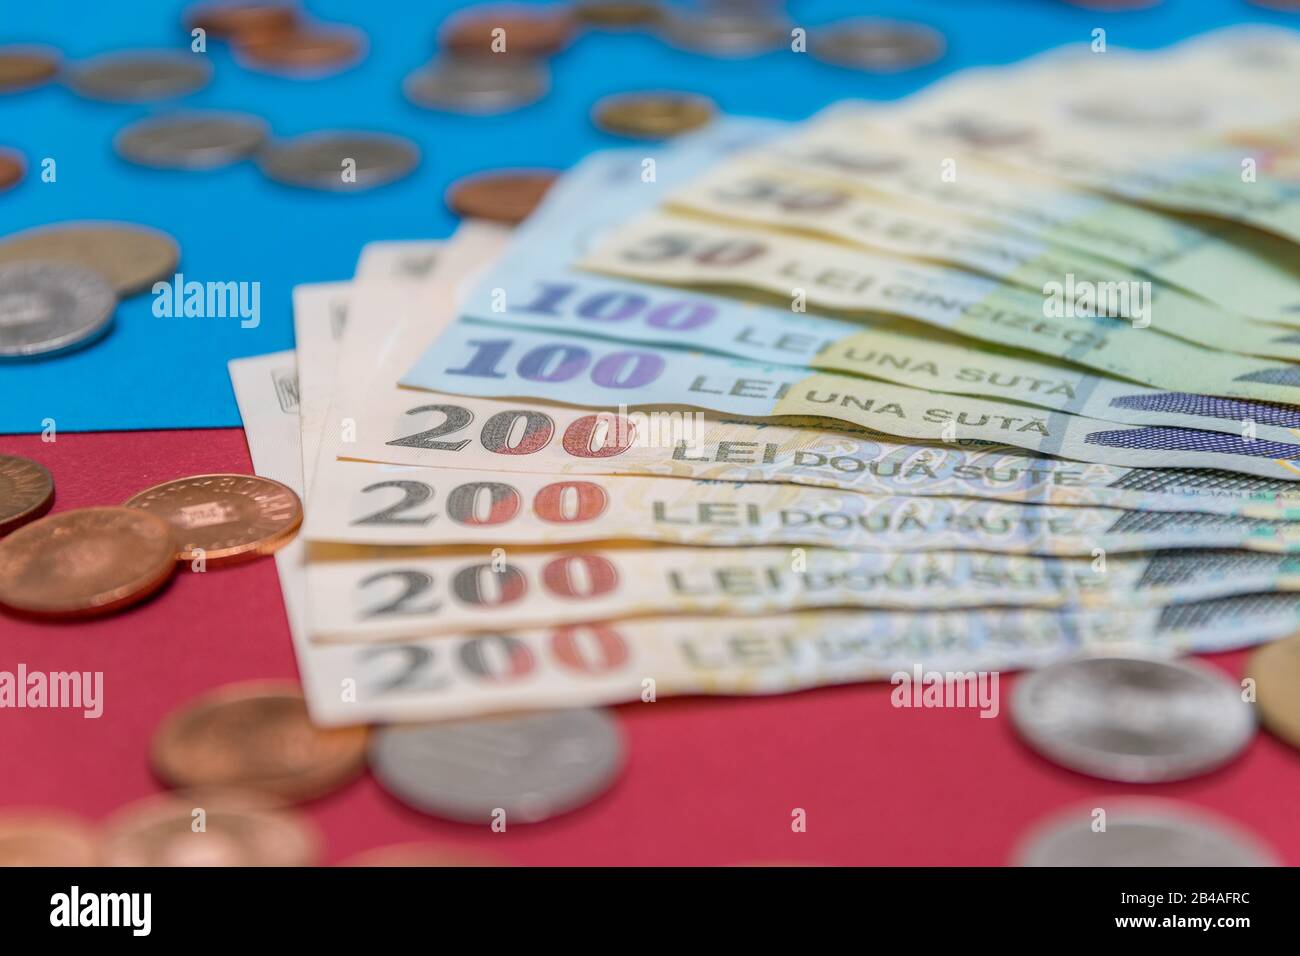 Romanian banknotes and coins on a blue and red background. Coloseup of RON, Romanian Currency. Romanian RON, Lei Banknotes issued by BNR, National Ban Stock Photo